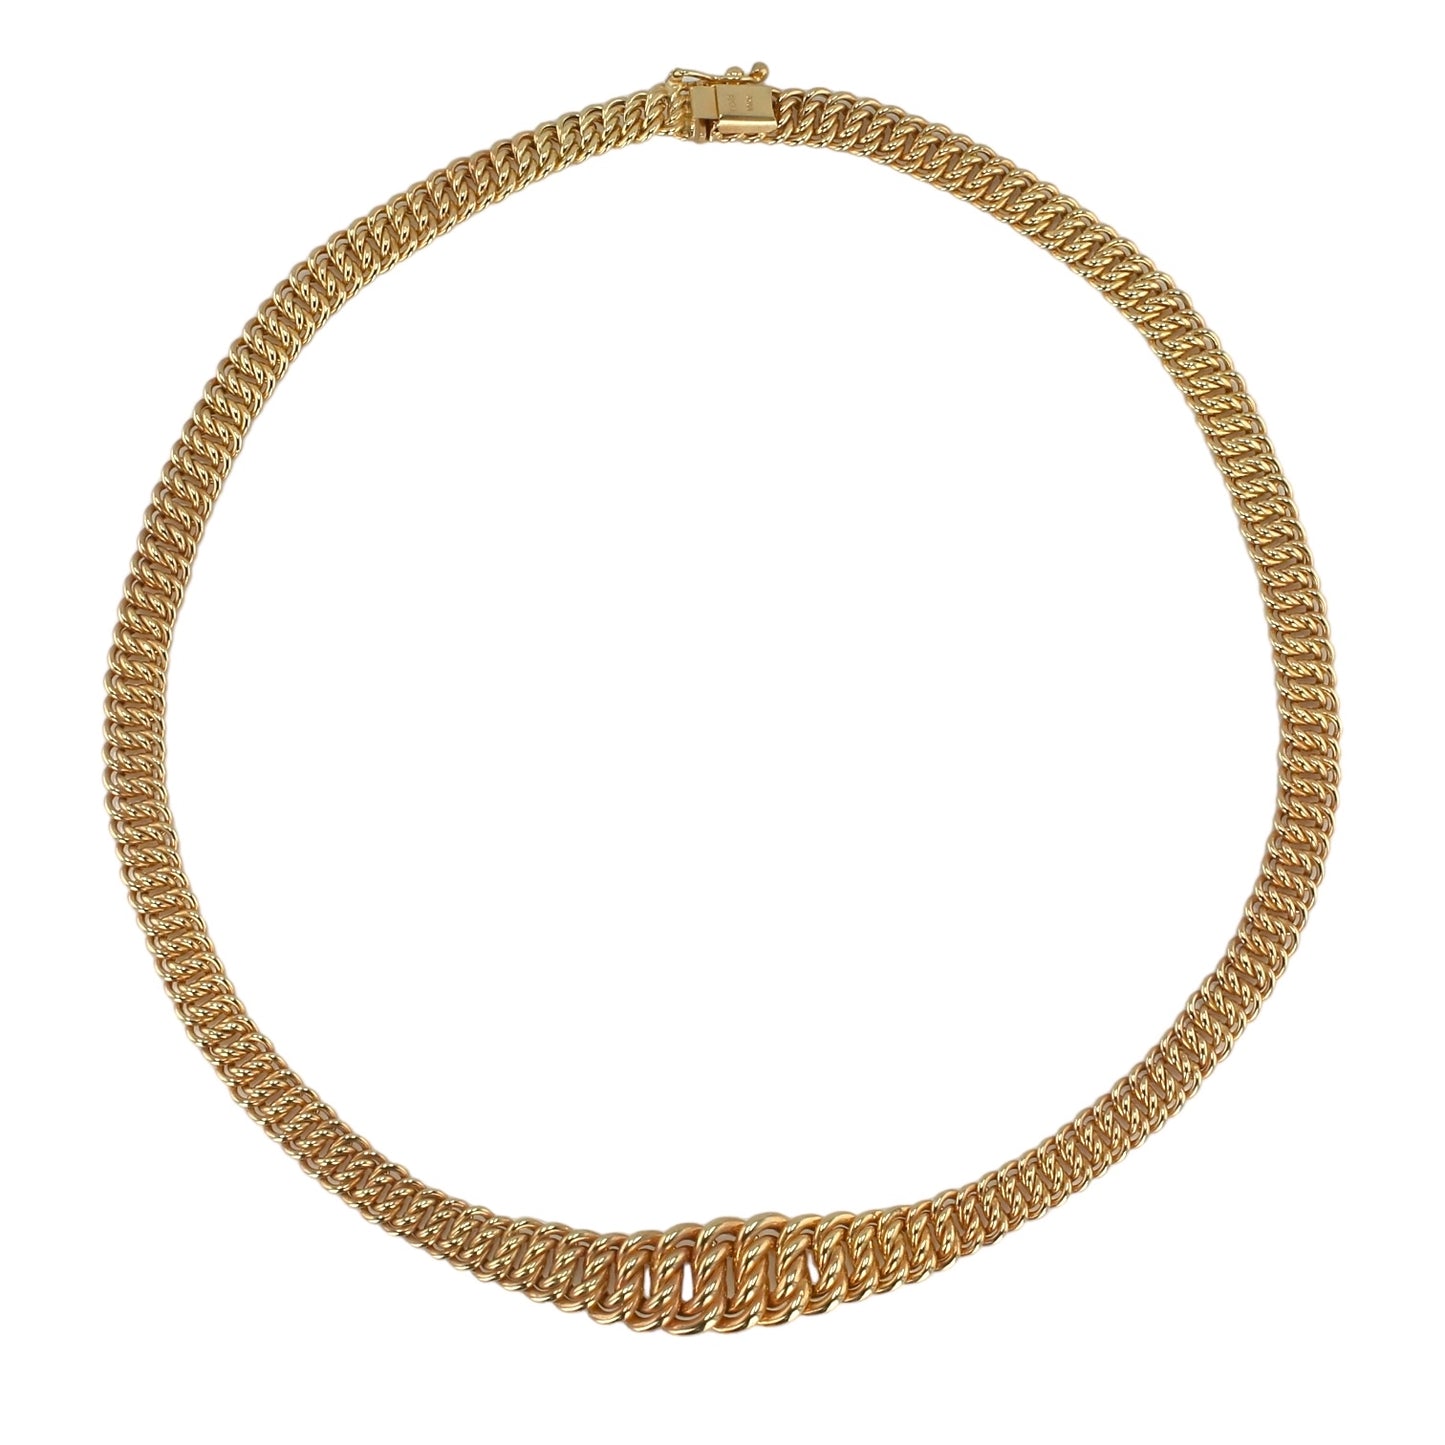 10K yellow gold princess style necklace